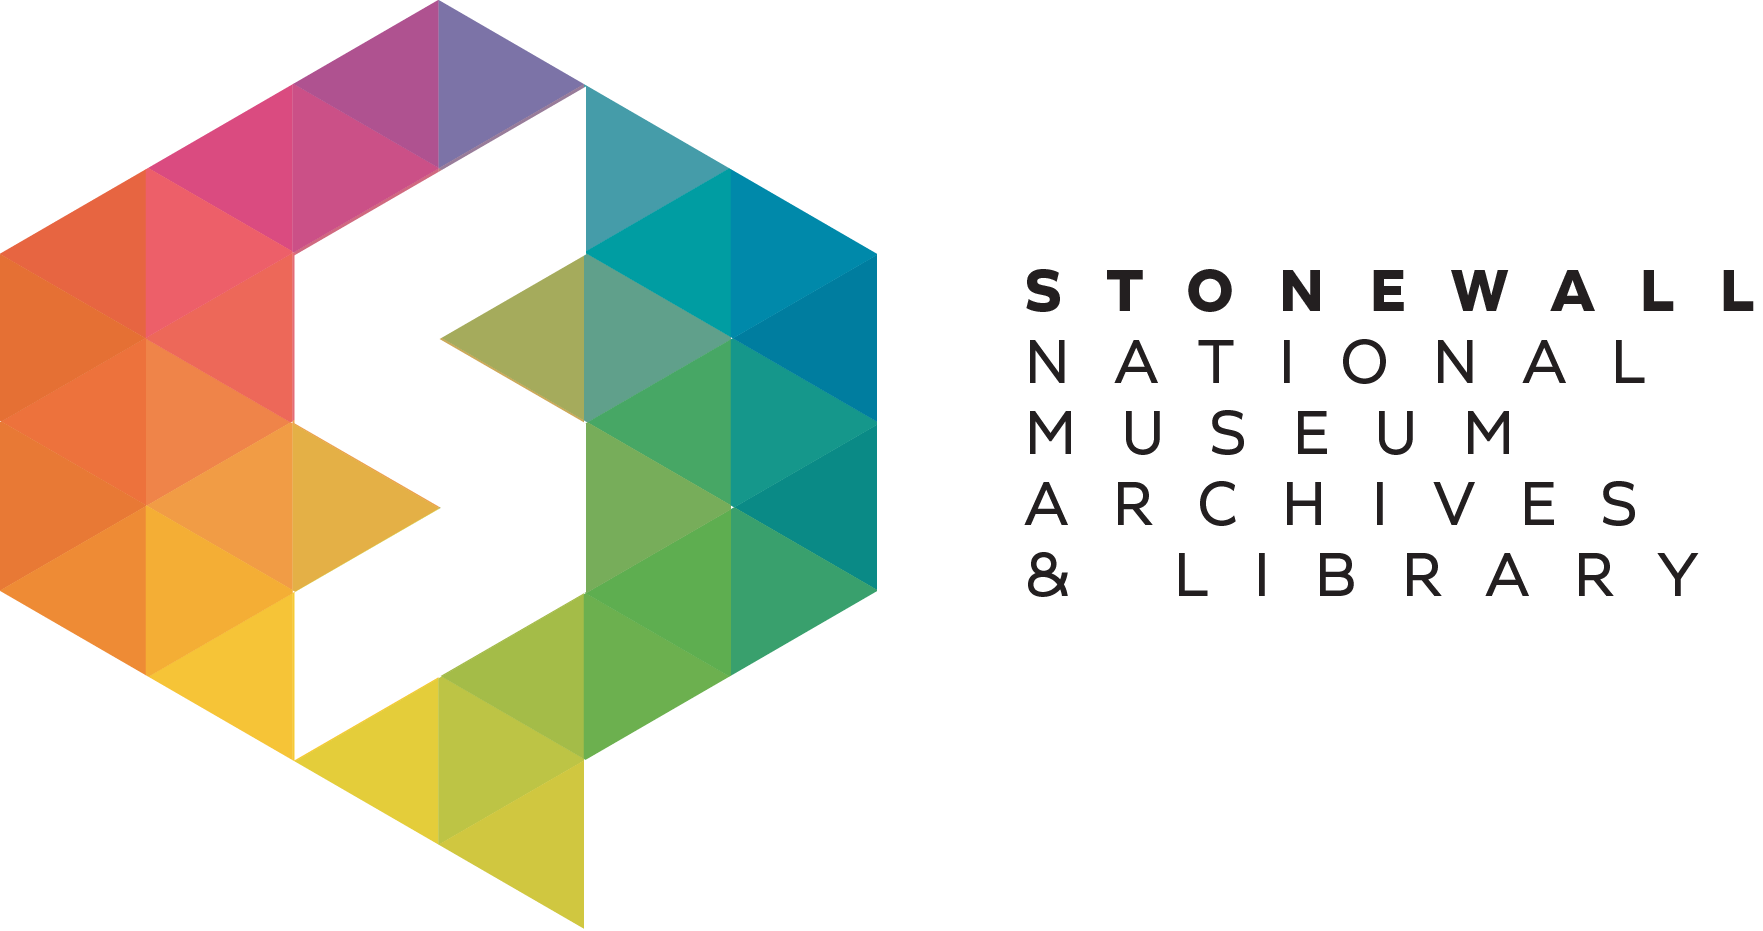 Stonewall National Museum, Archive & Library to Receive Grant from the National Endowment for the Arts